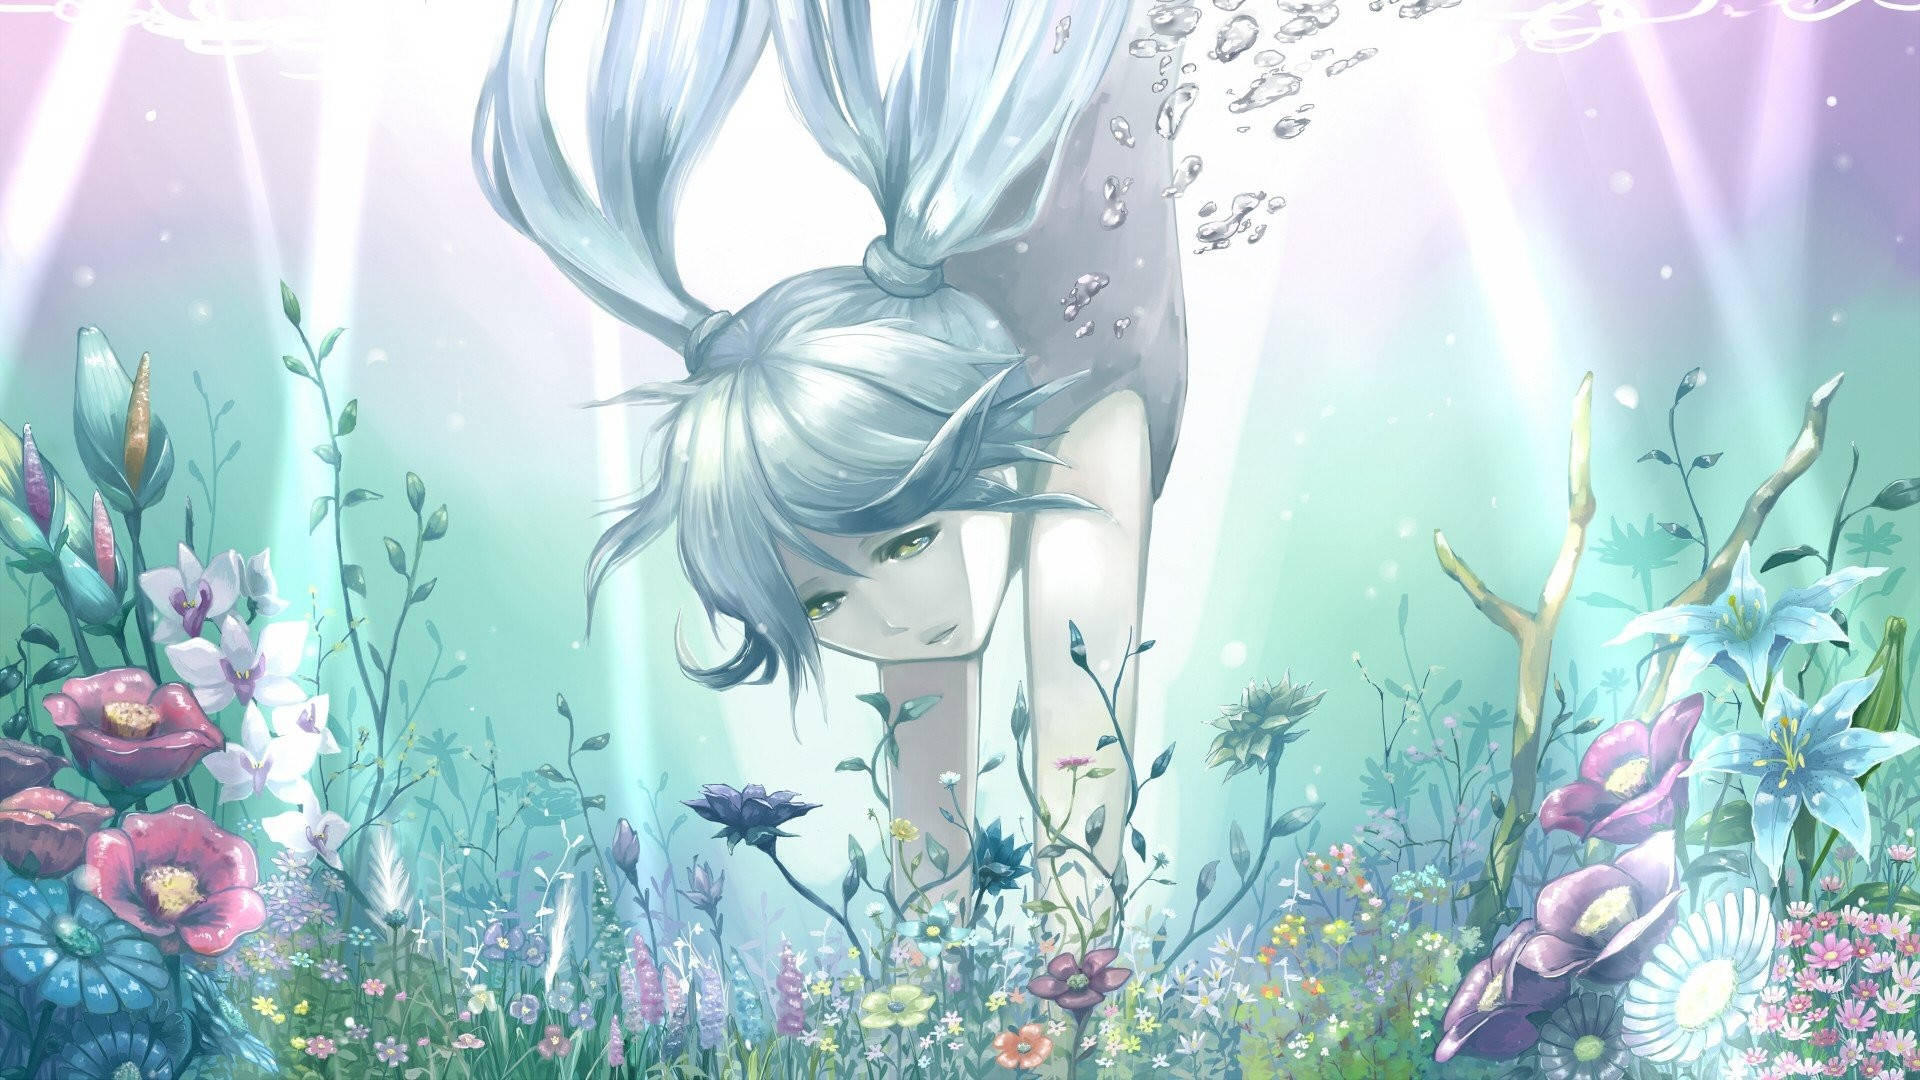 A Girl With Long Hair Is Floating In A Field Of Flowers Wallpaper